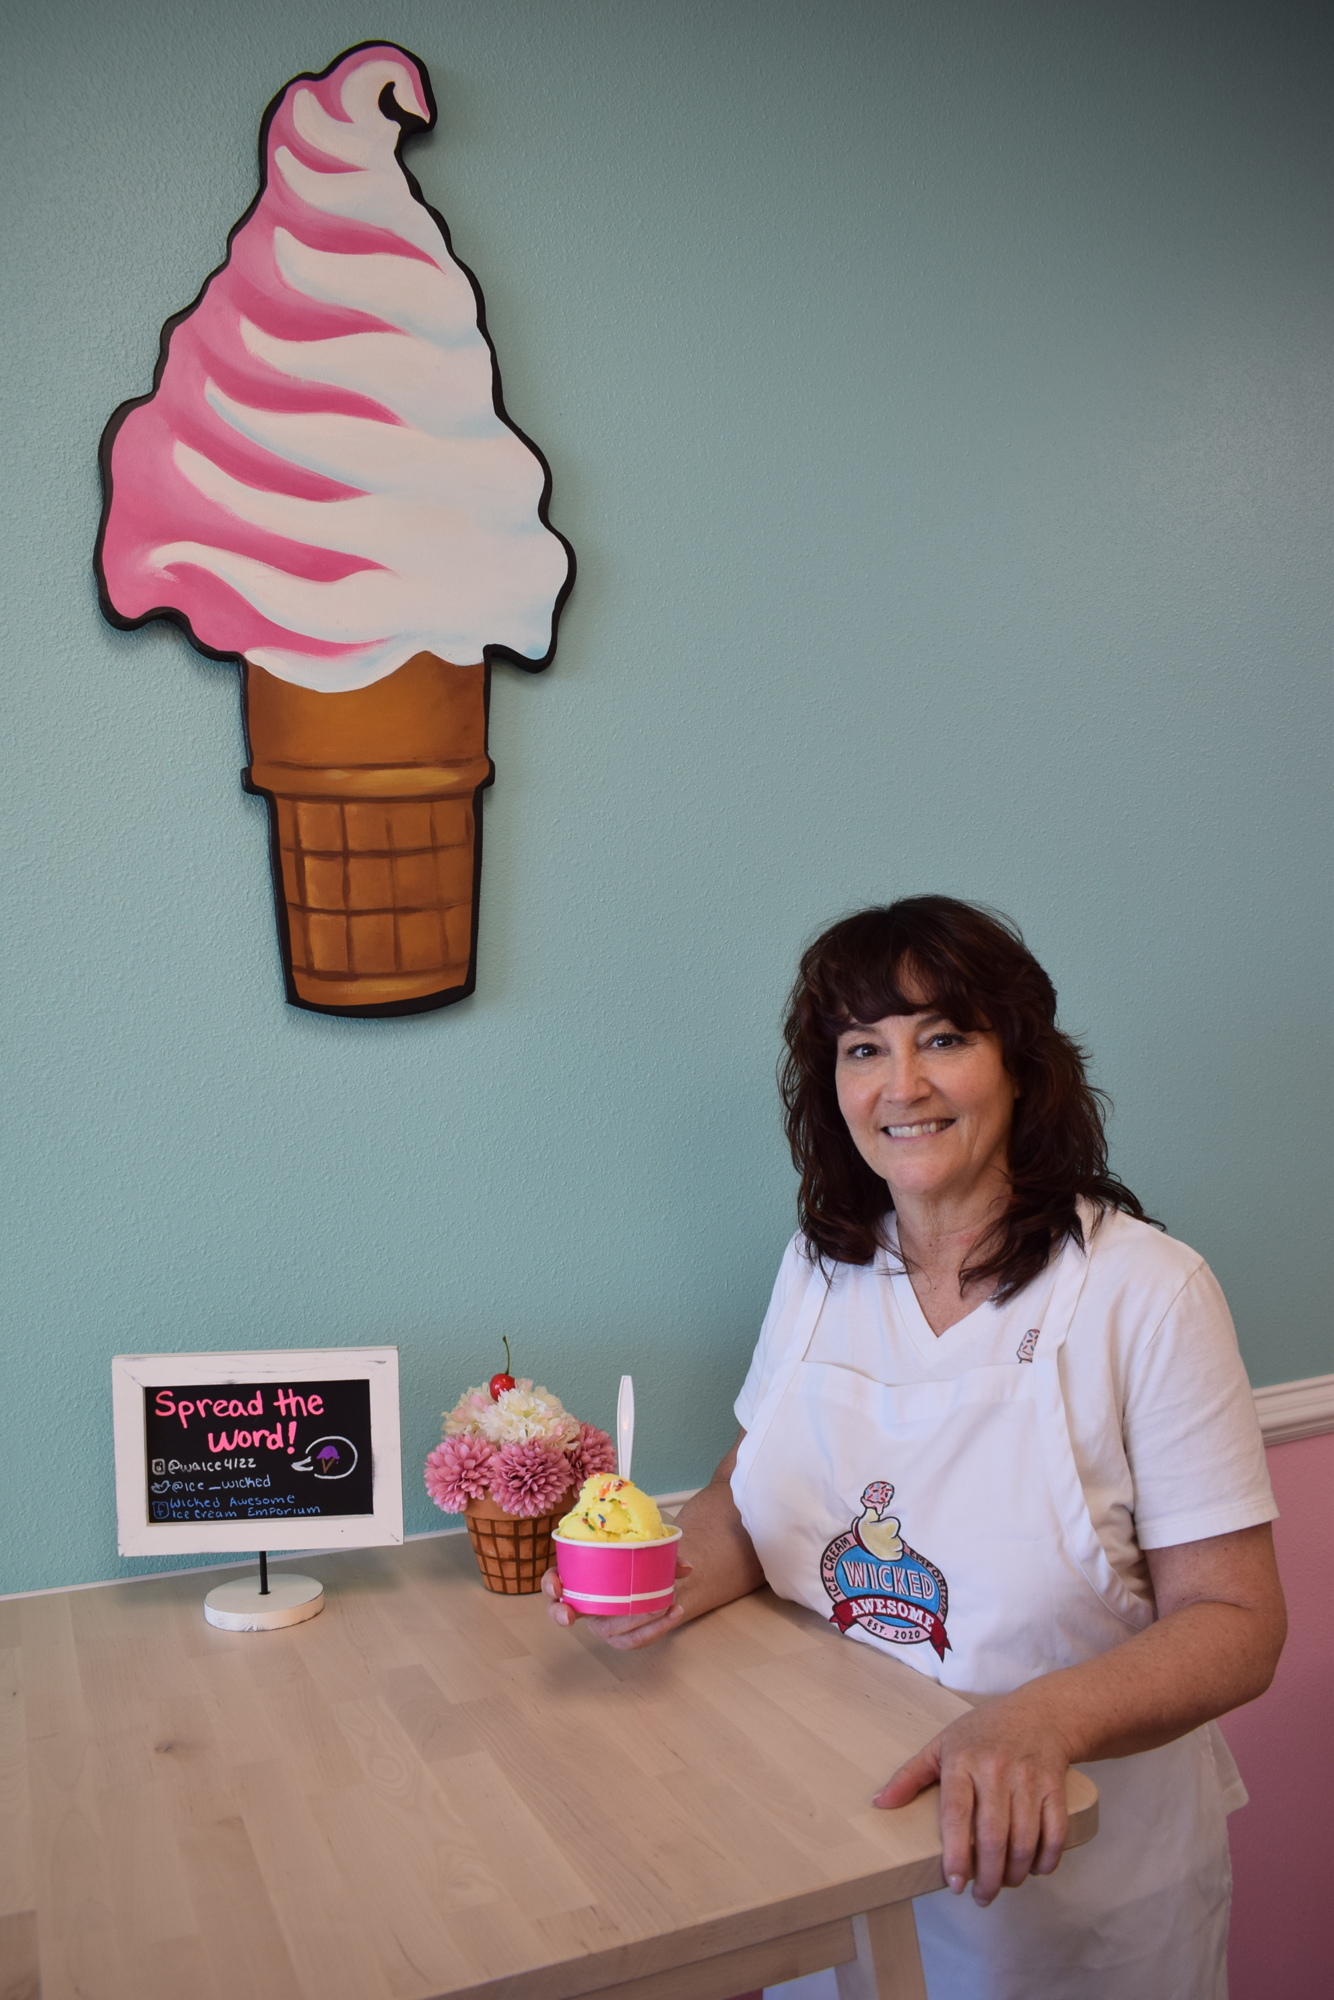 Besides her delicious ice cream, Michelle Noel serves up whimsy in her shop on Lakewood Ranch Boulevard.